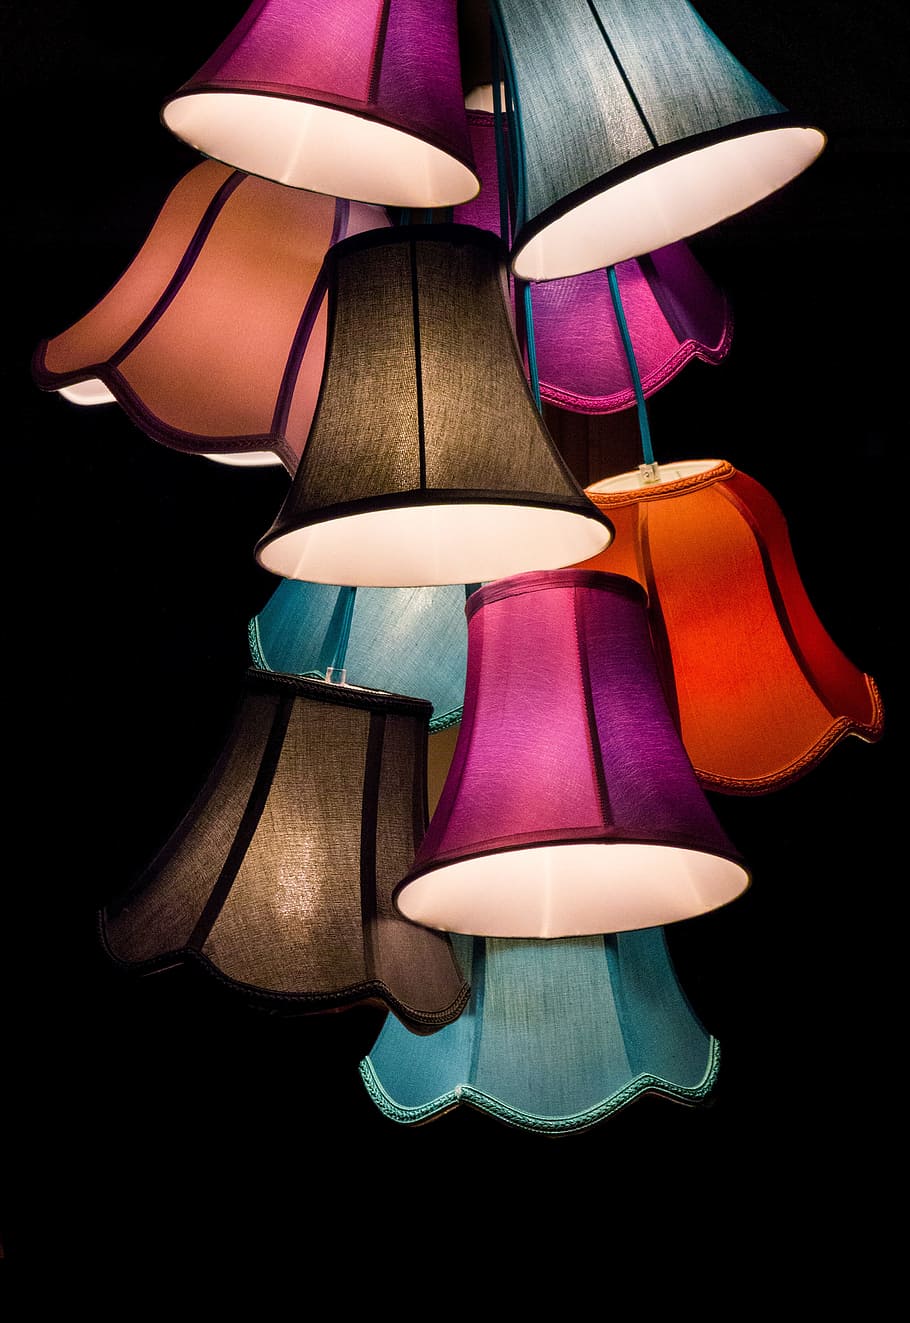 assorted, color, hanging, lamps, light, lampshade, screen, deco, living room, chandelier